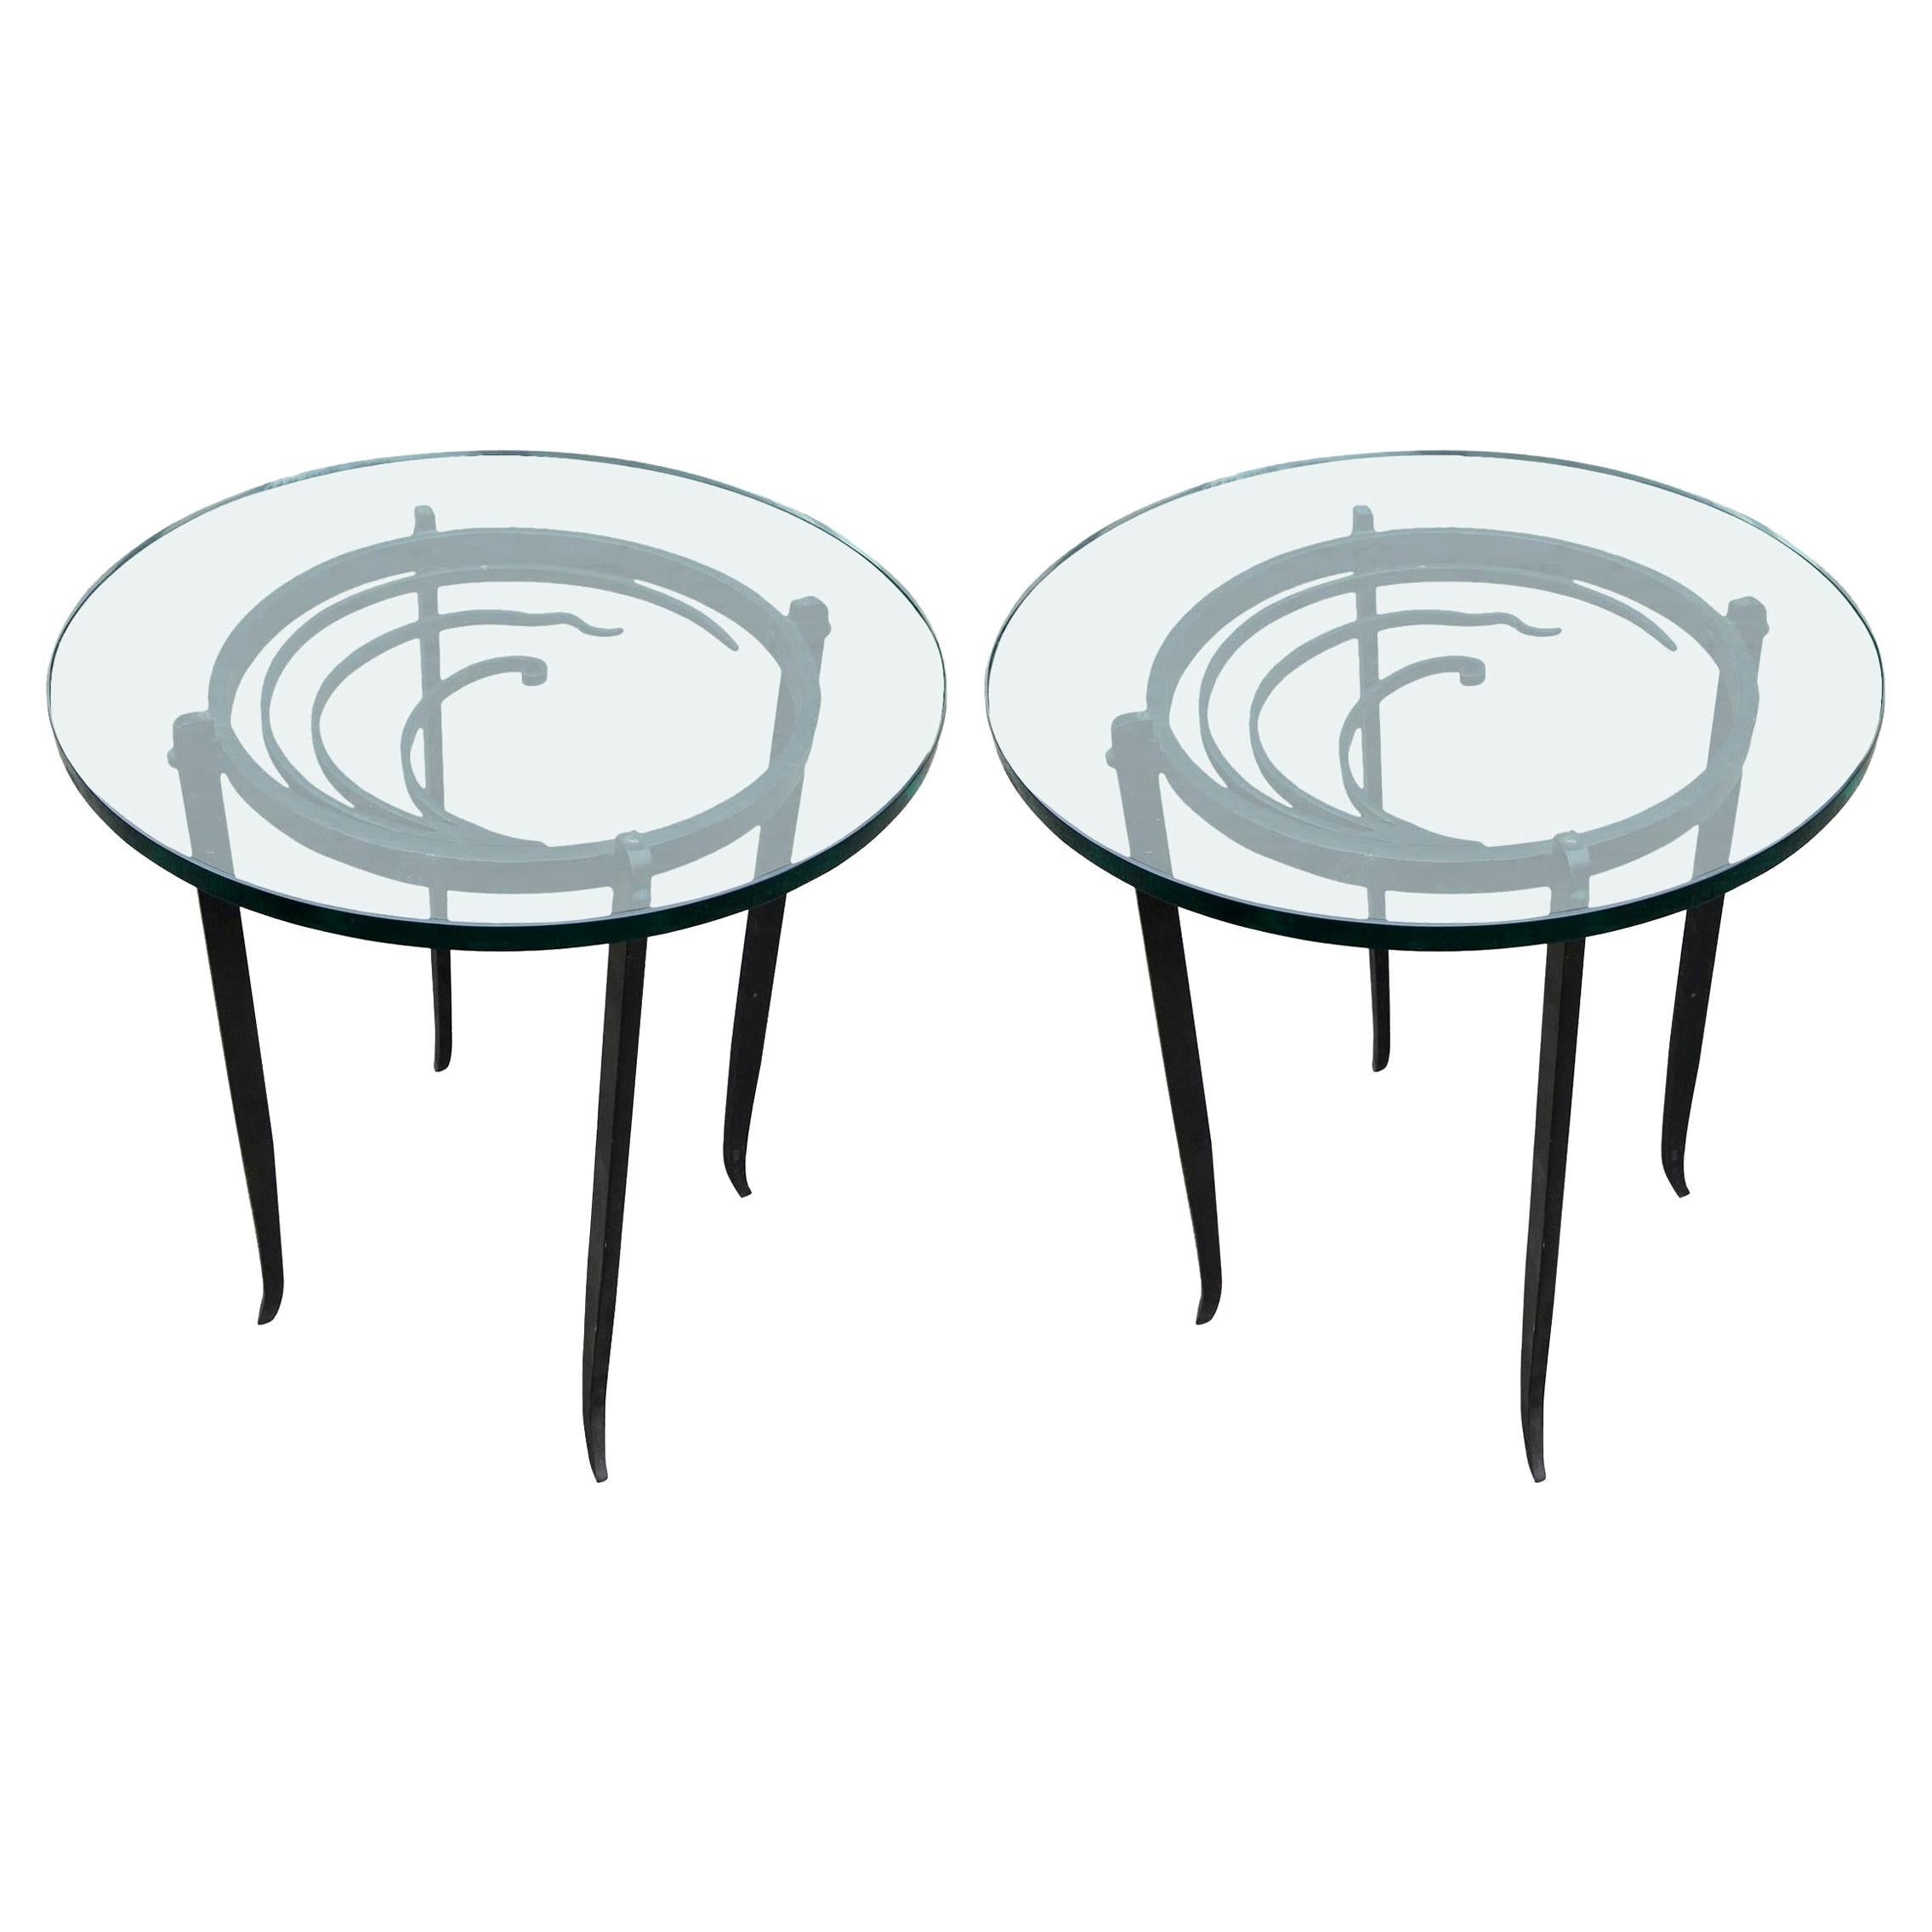 Pair of Black Metal Art Deco Side Tables with Glass Tops, 1940s For Sale